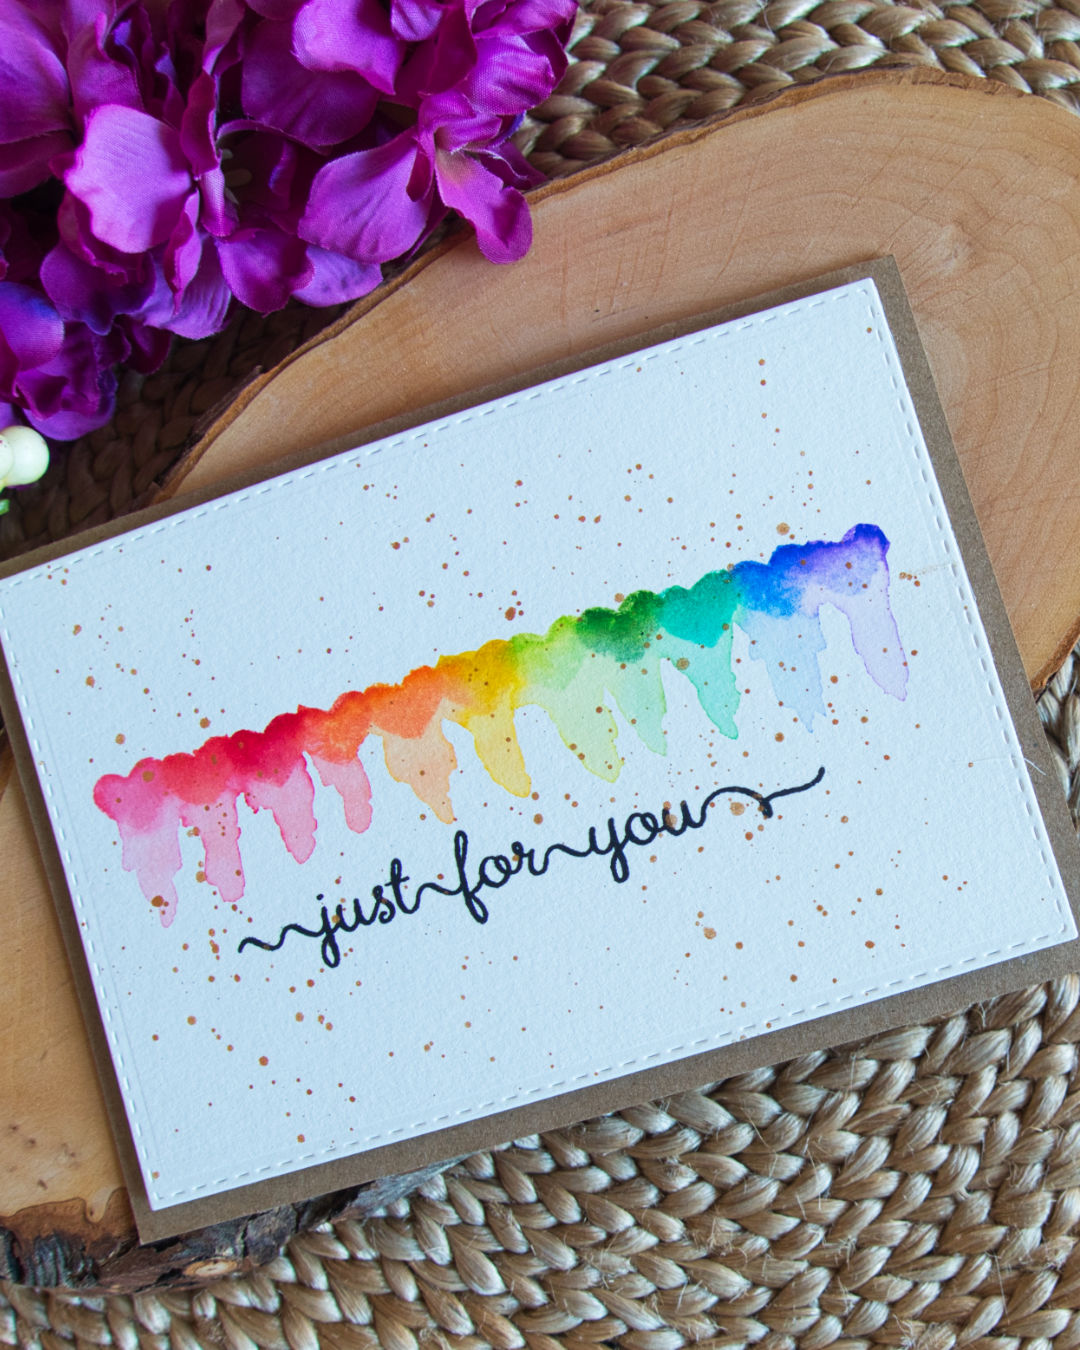 Card for Valentines day, with rainbow hearts with messy reflections using distress inks.